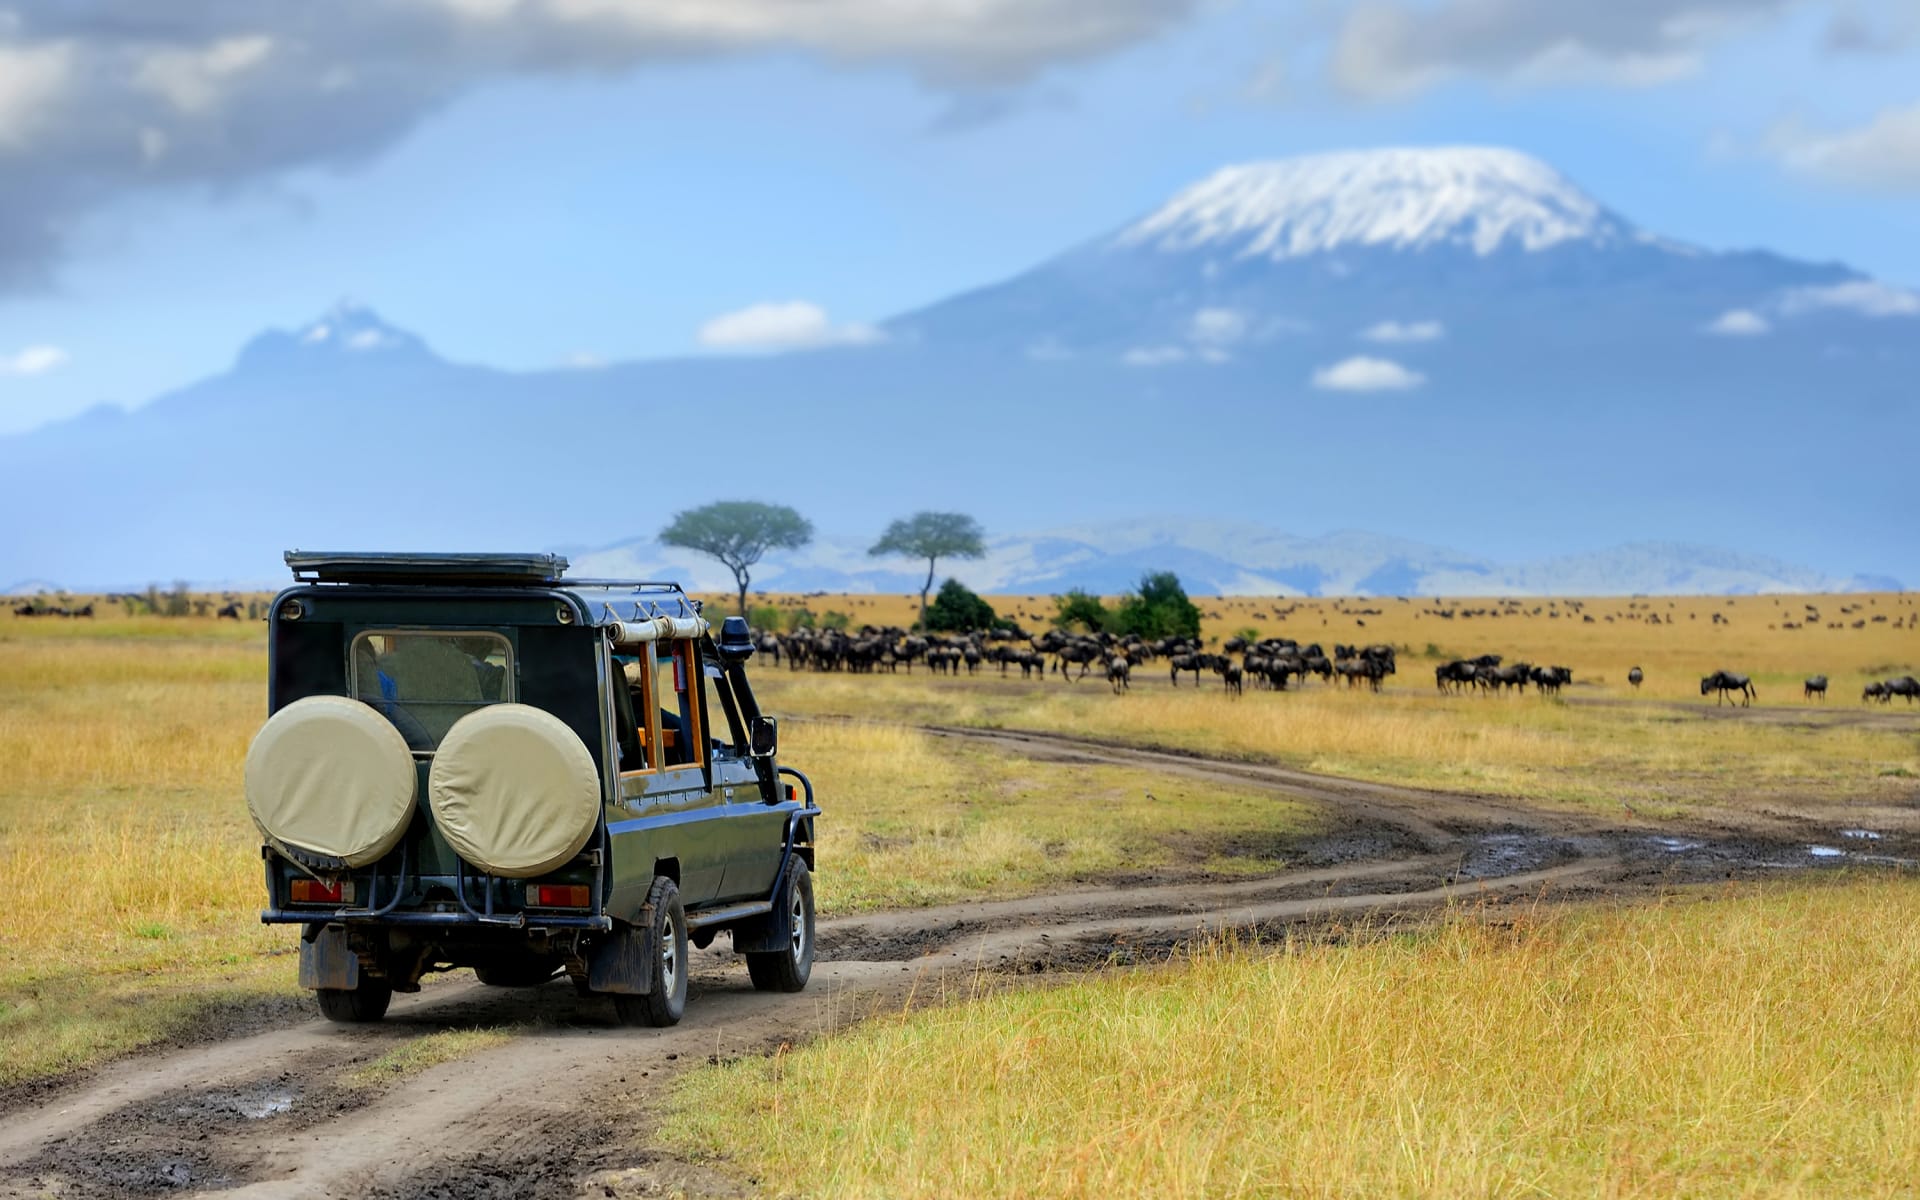 A 4x4 vehicle drives towards a towering mountain peak on the Masai Mara during daytime.